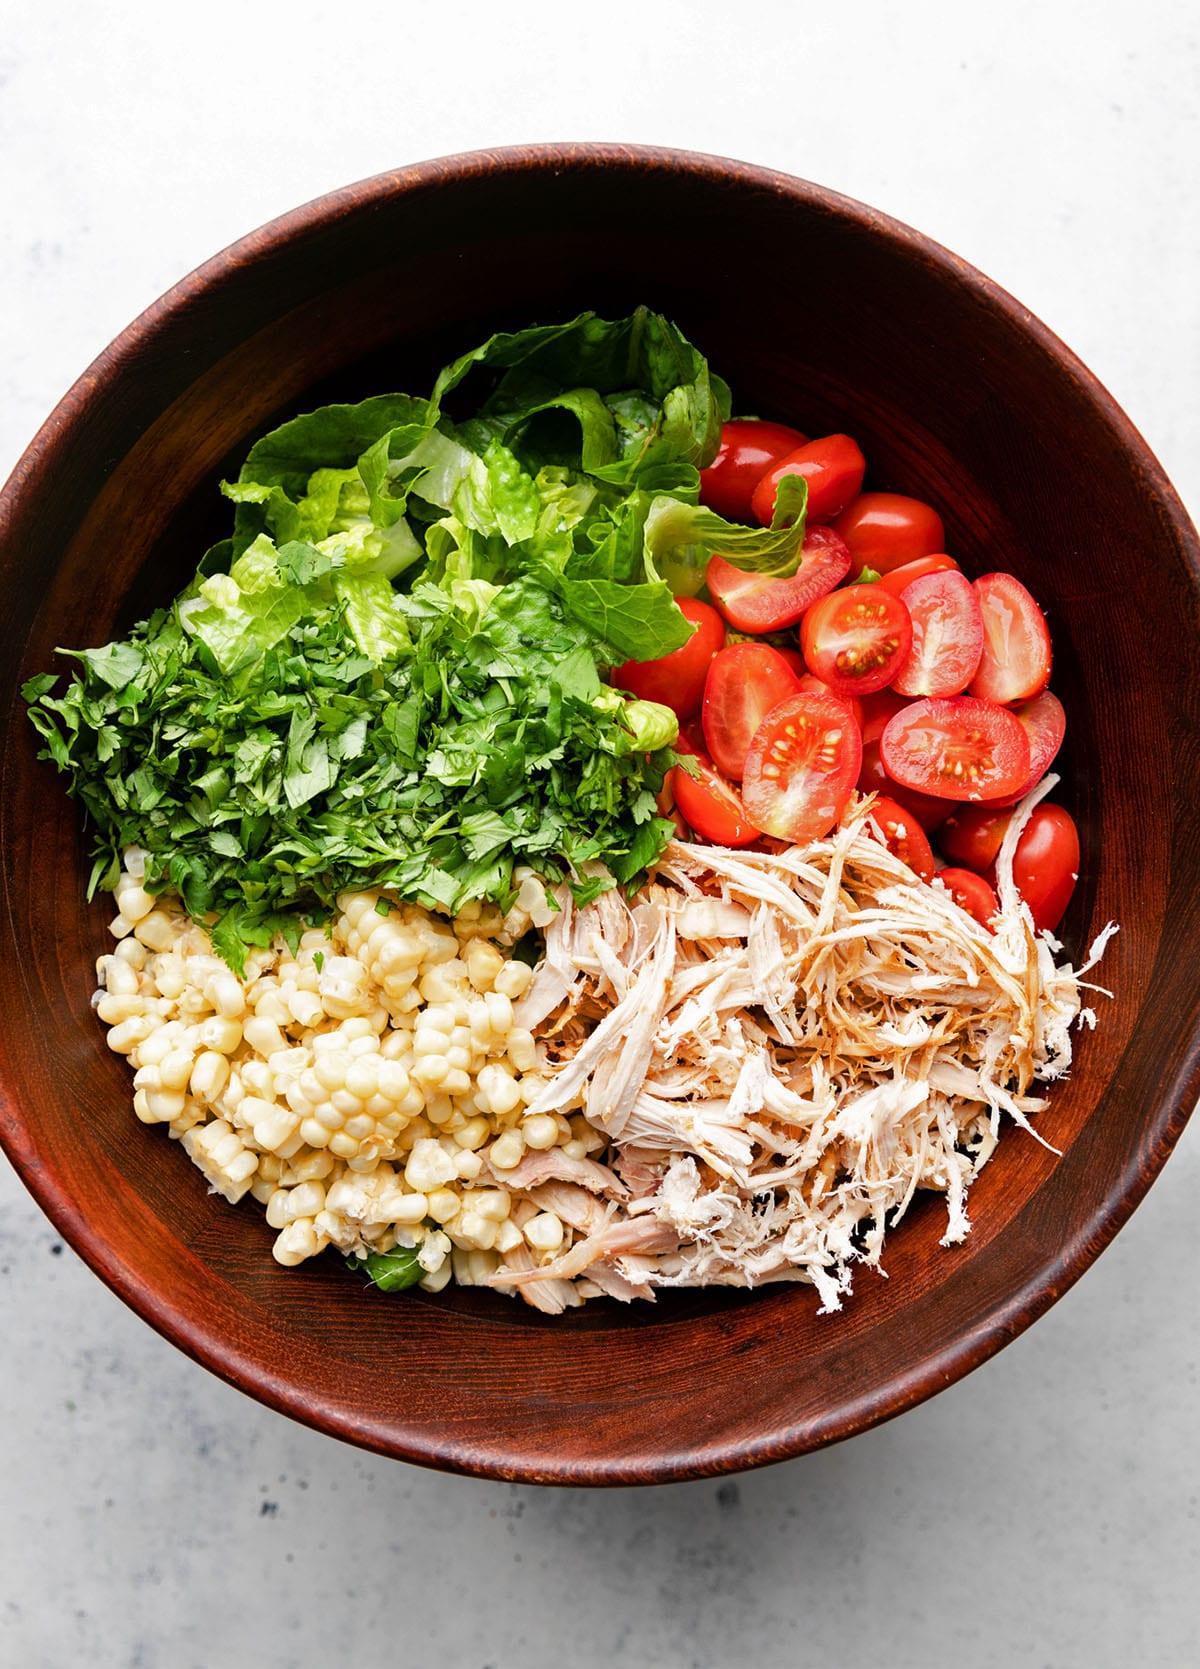 Chicken chopped salad ingredients in a large brown bowl.